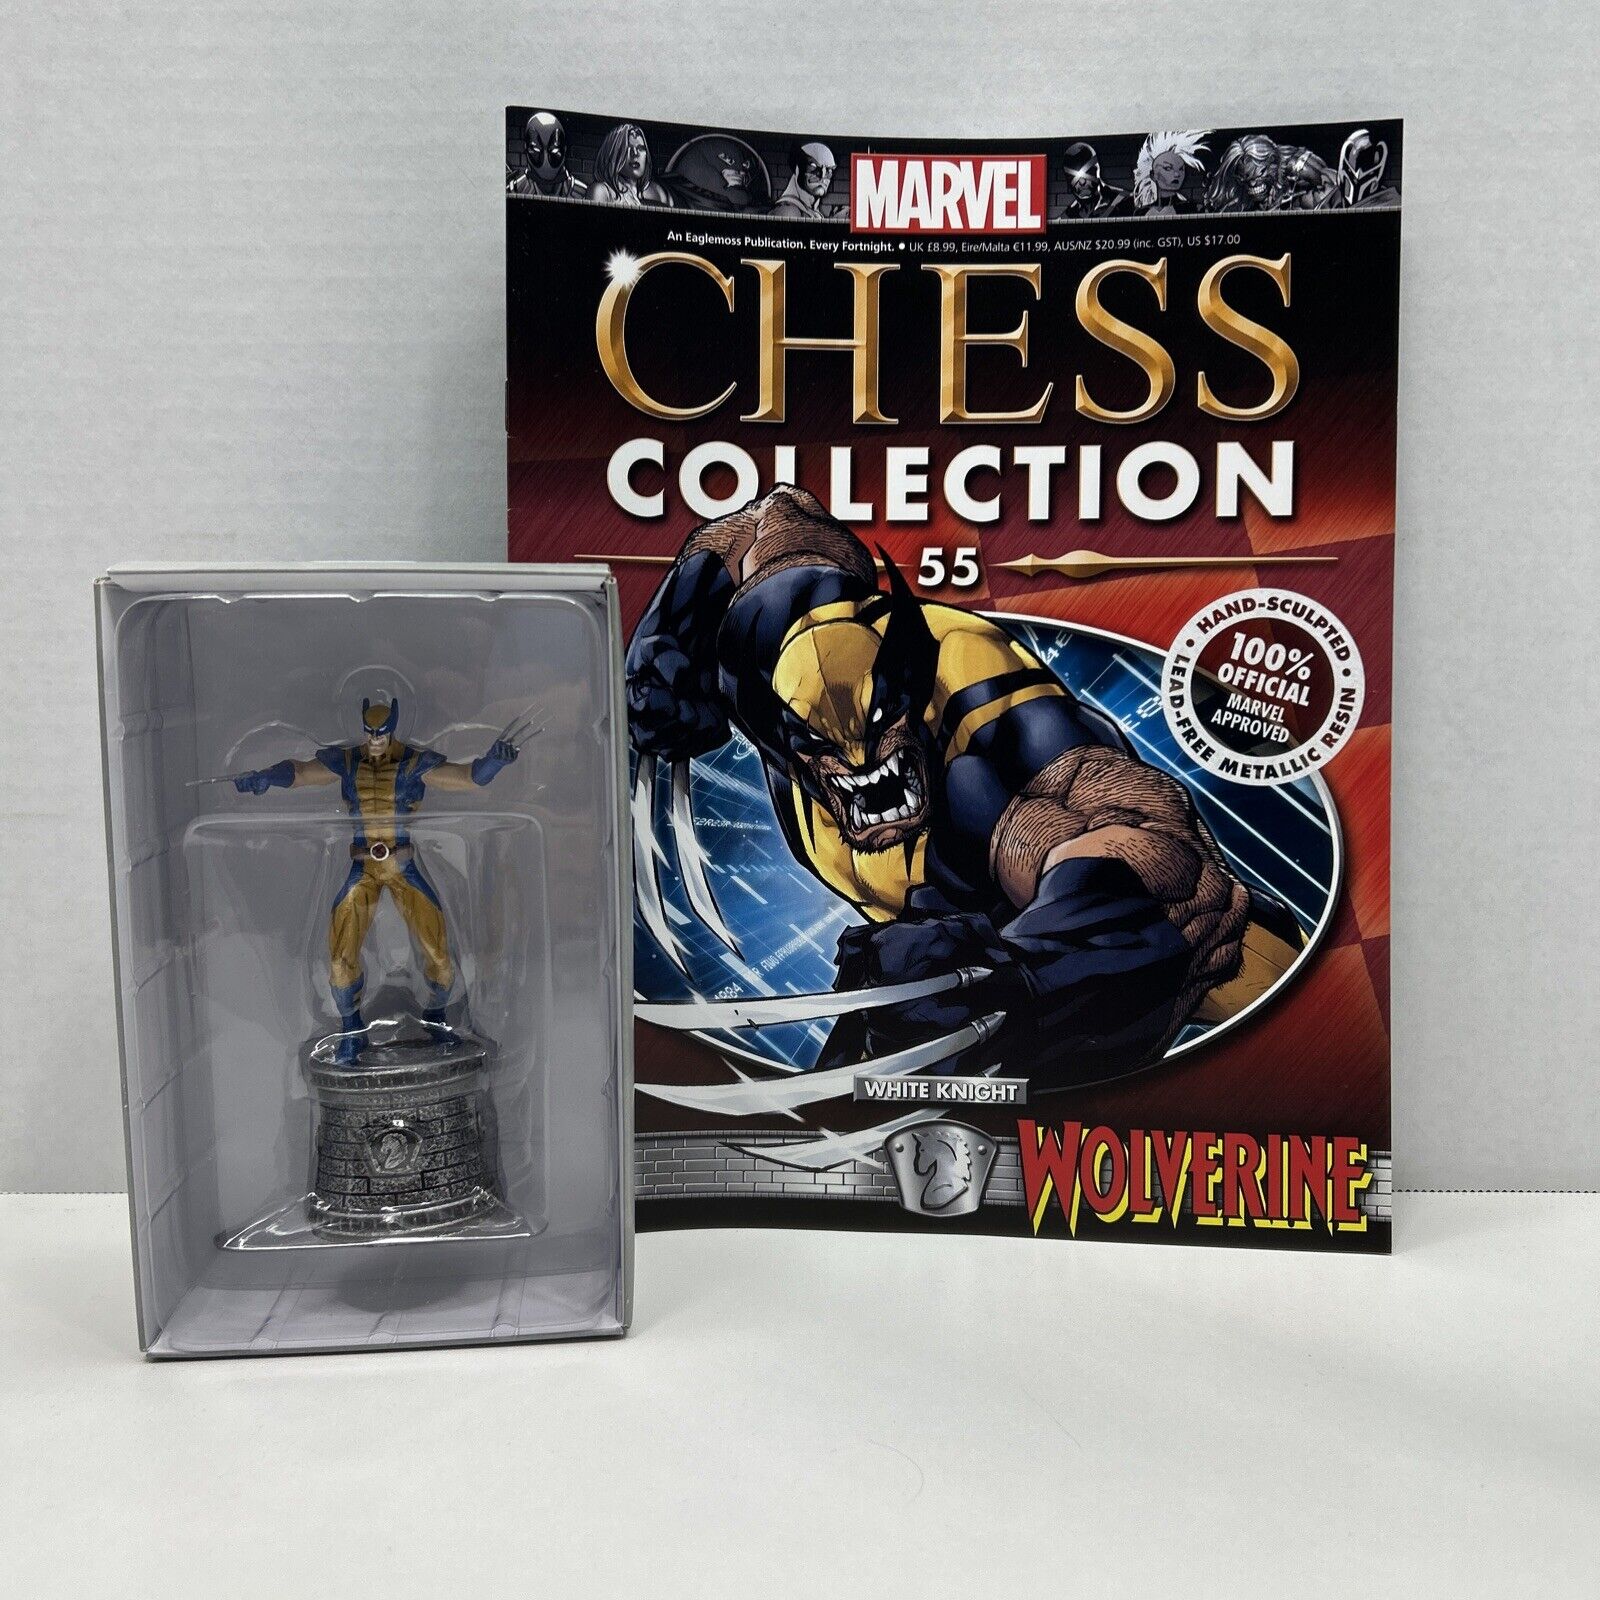 Eaglemoss Marvel Chess Collection Figurine with Magazine #55, Wolverine